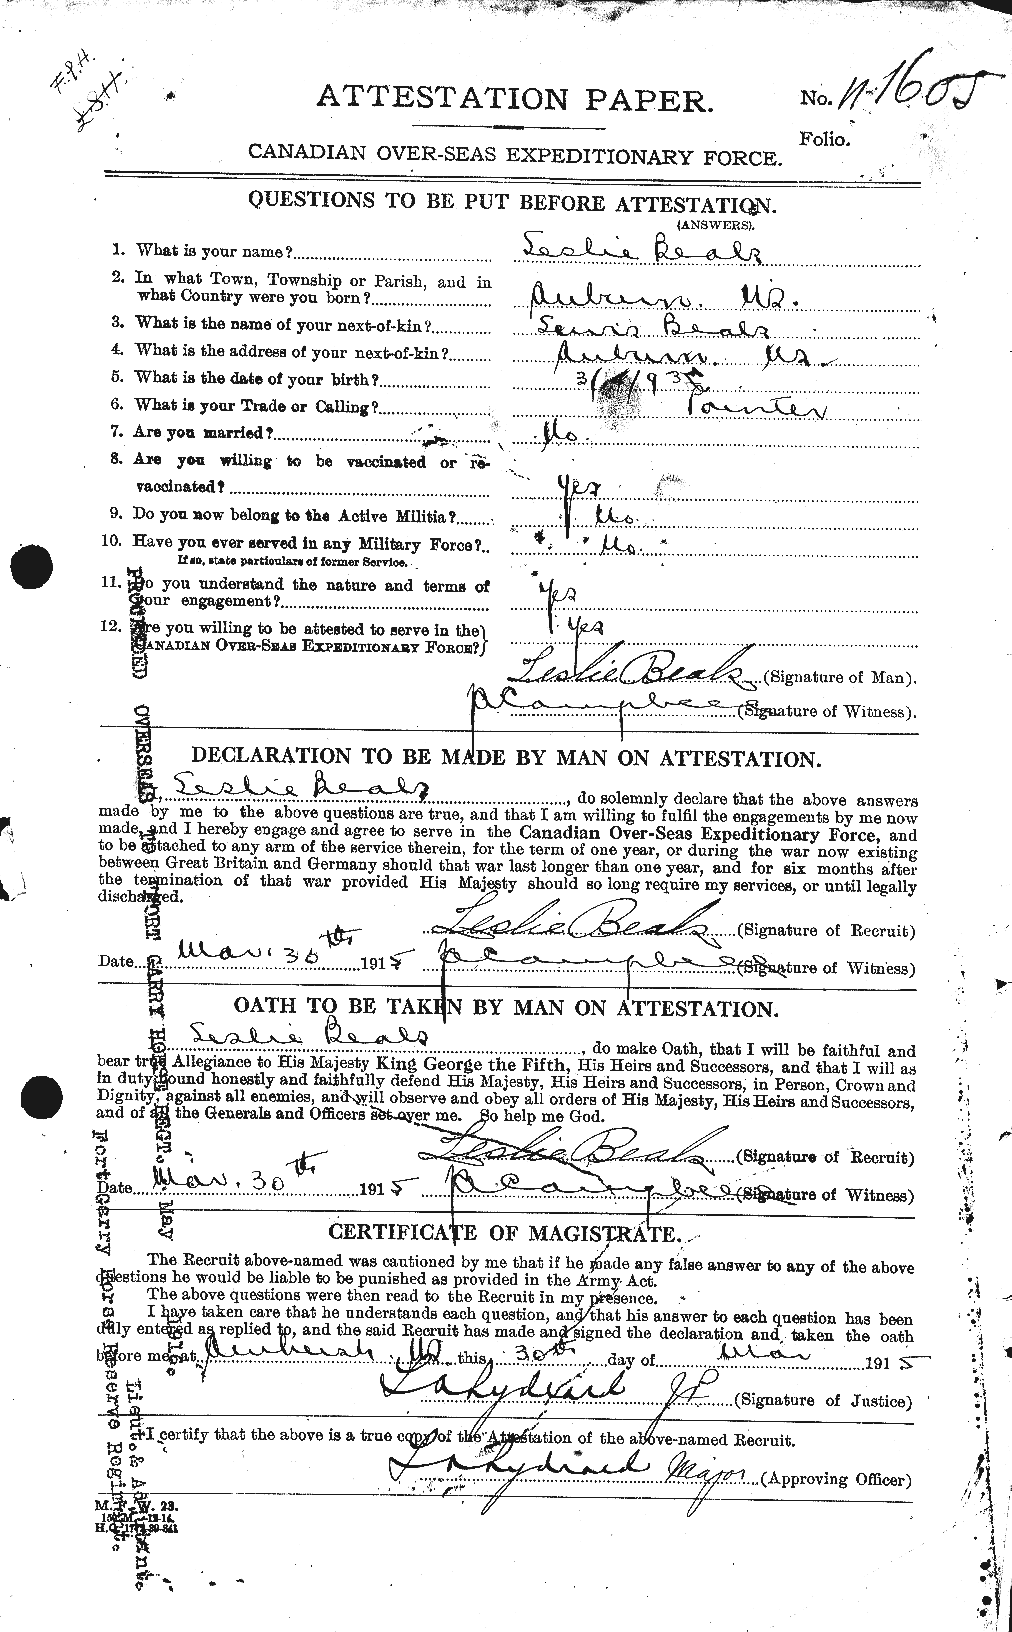 Personnel Records of the First World War - CEF 235393a